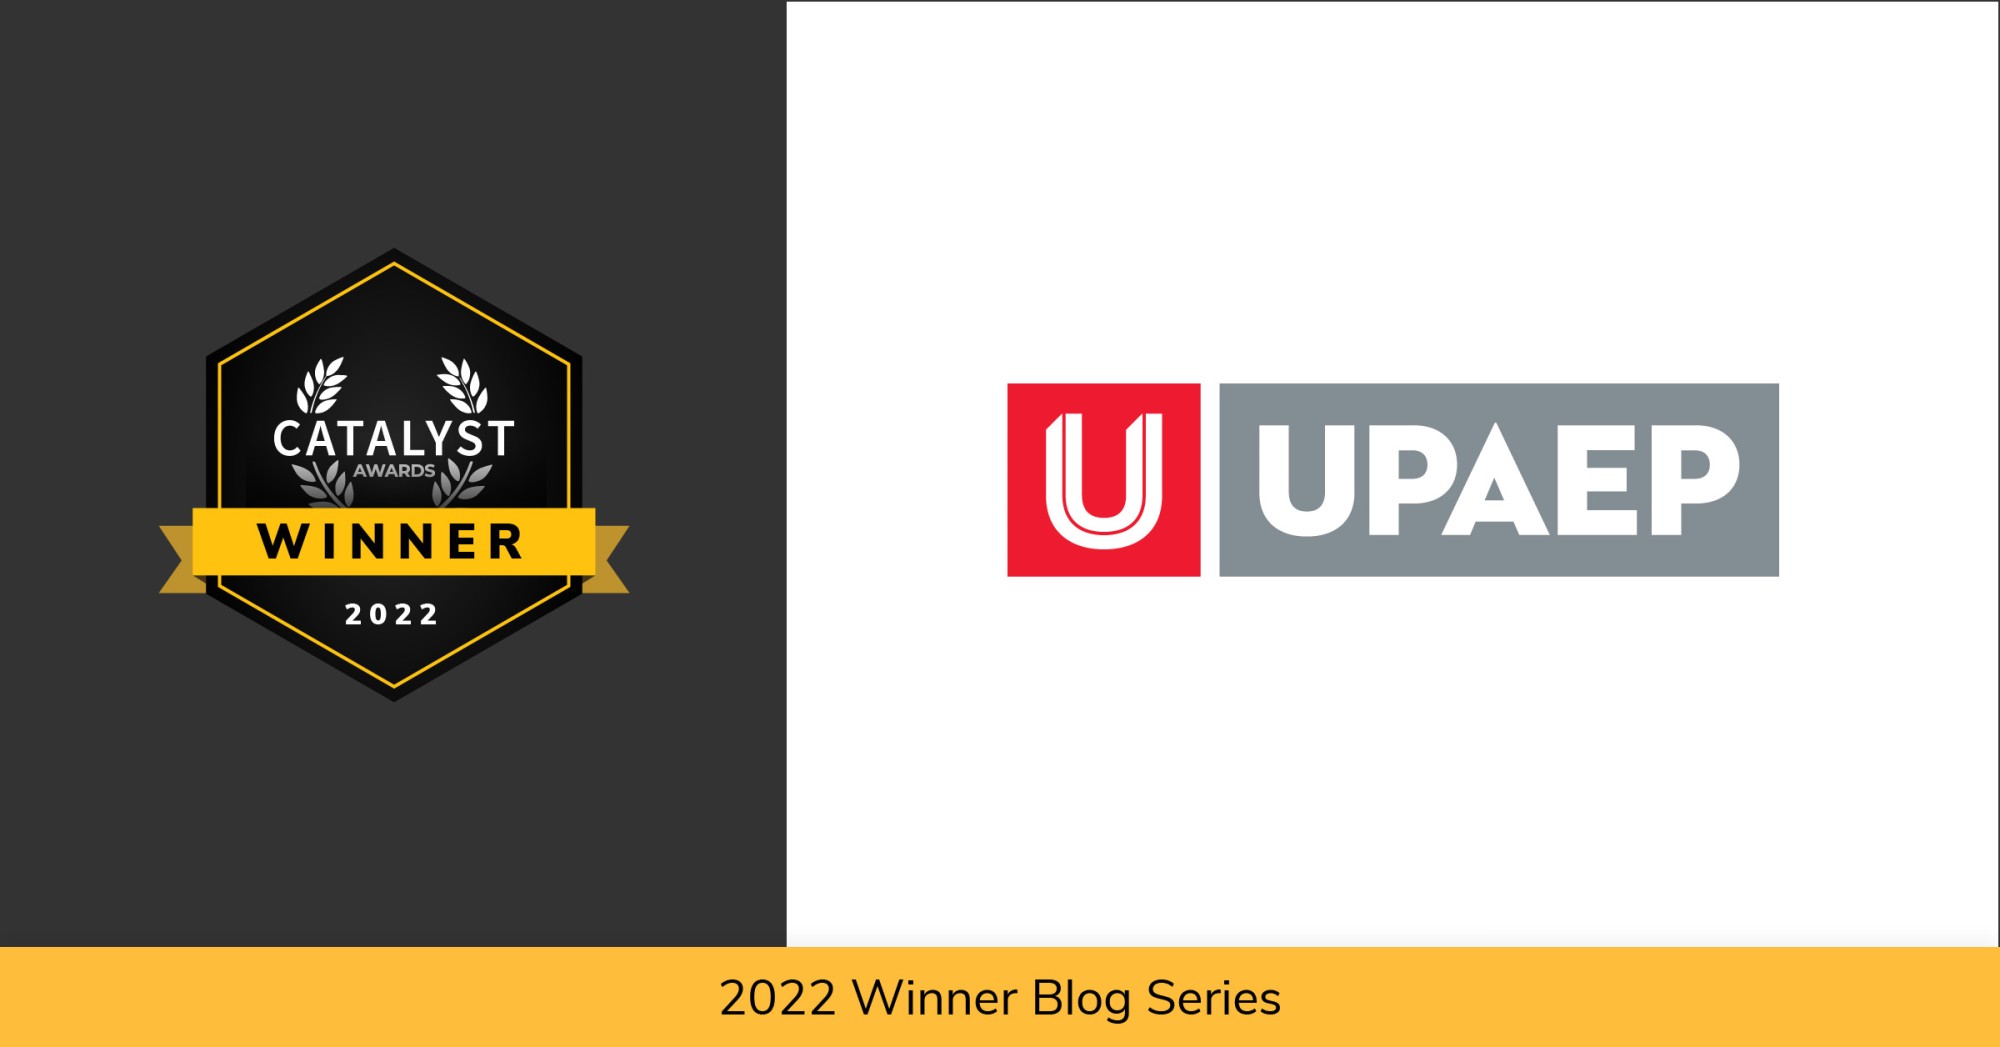 Anthology Catalyst Award Winner logo locked up with the UPAEP logo over the text 2022 Winner Blog Series